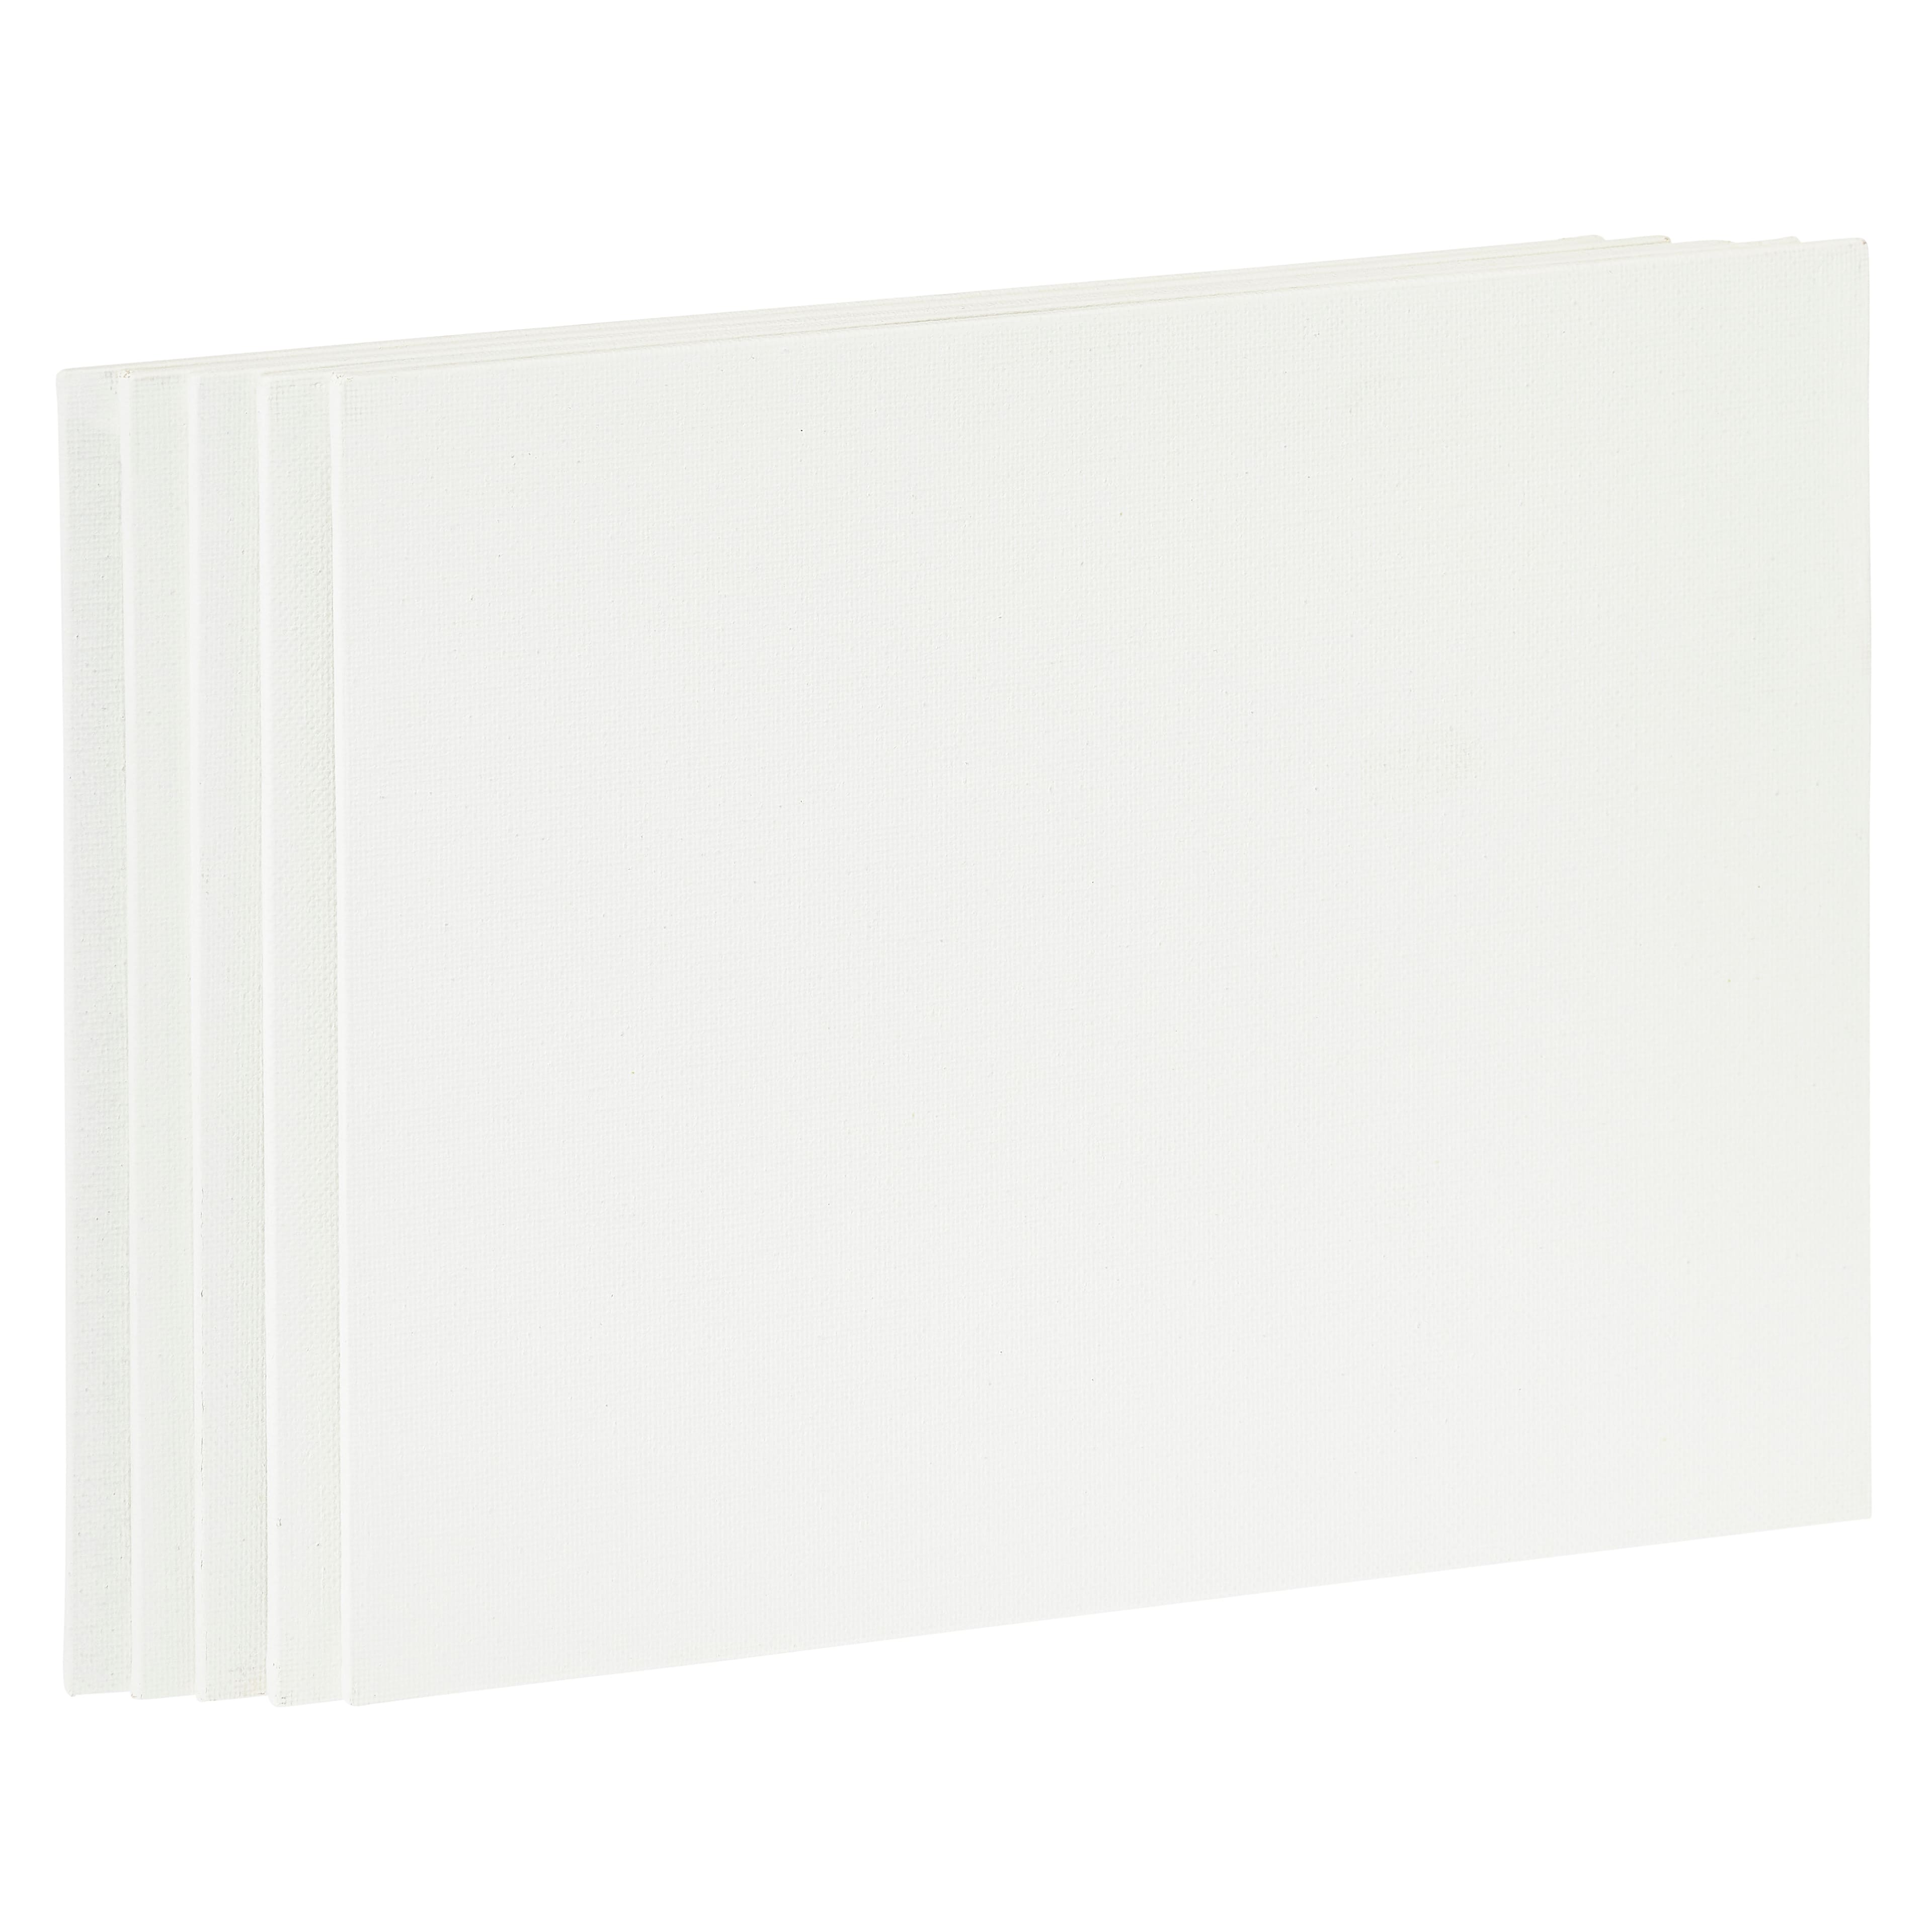 8 ct S: 5 Ct. (40 Total) 8 x 10 Canvas Panel Value ct by Artist's Loft Necessities in White | Michaels